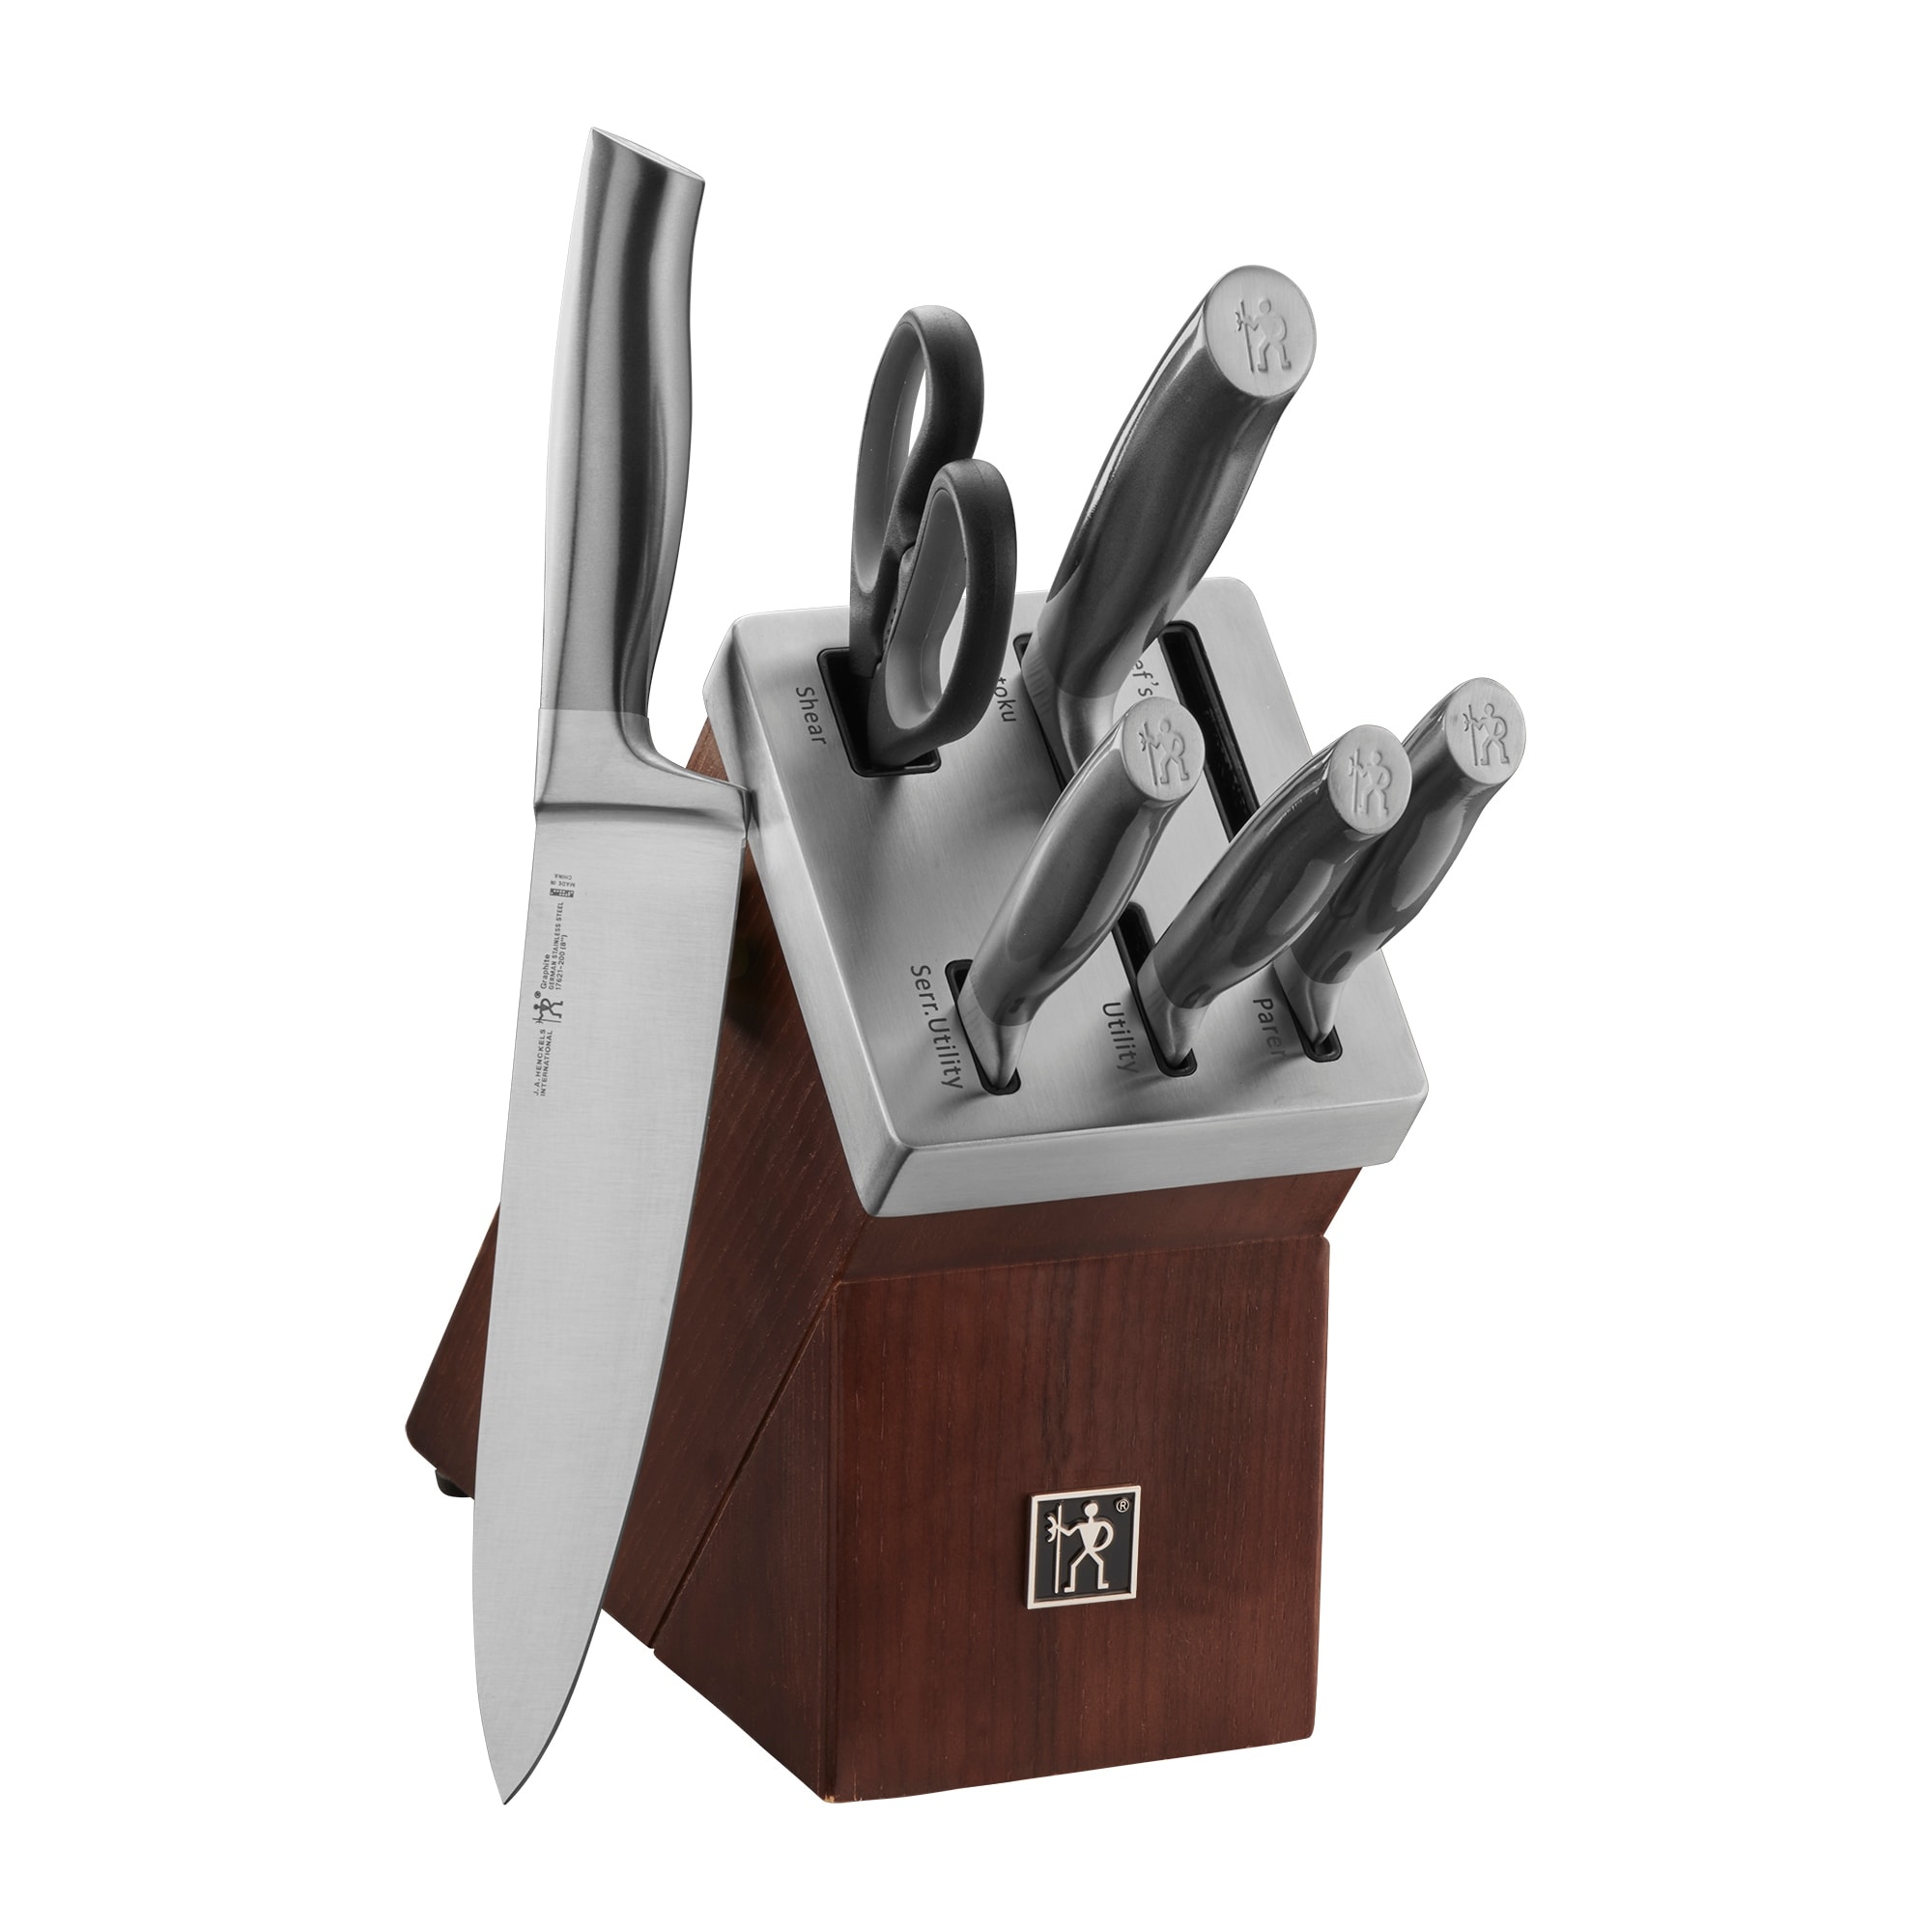 https://ak1.ostkcdn.com/images/products/is/images/direct/79faa47123de3f3478f73bd3e11bd7766fd8c6d5/J.A.-Henckels-International-Graphite-7-pc-Self-Sharpening-Block-Set.jpg